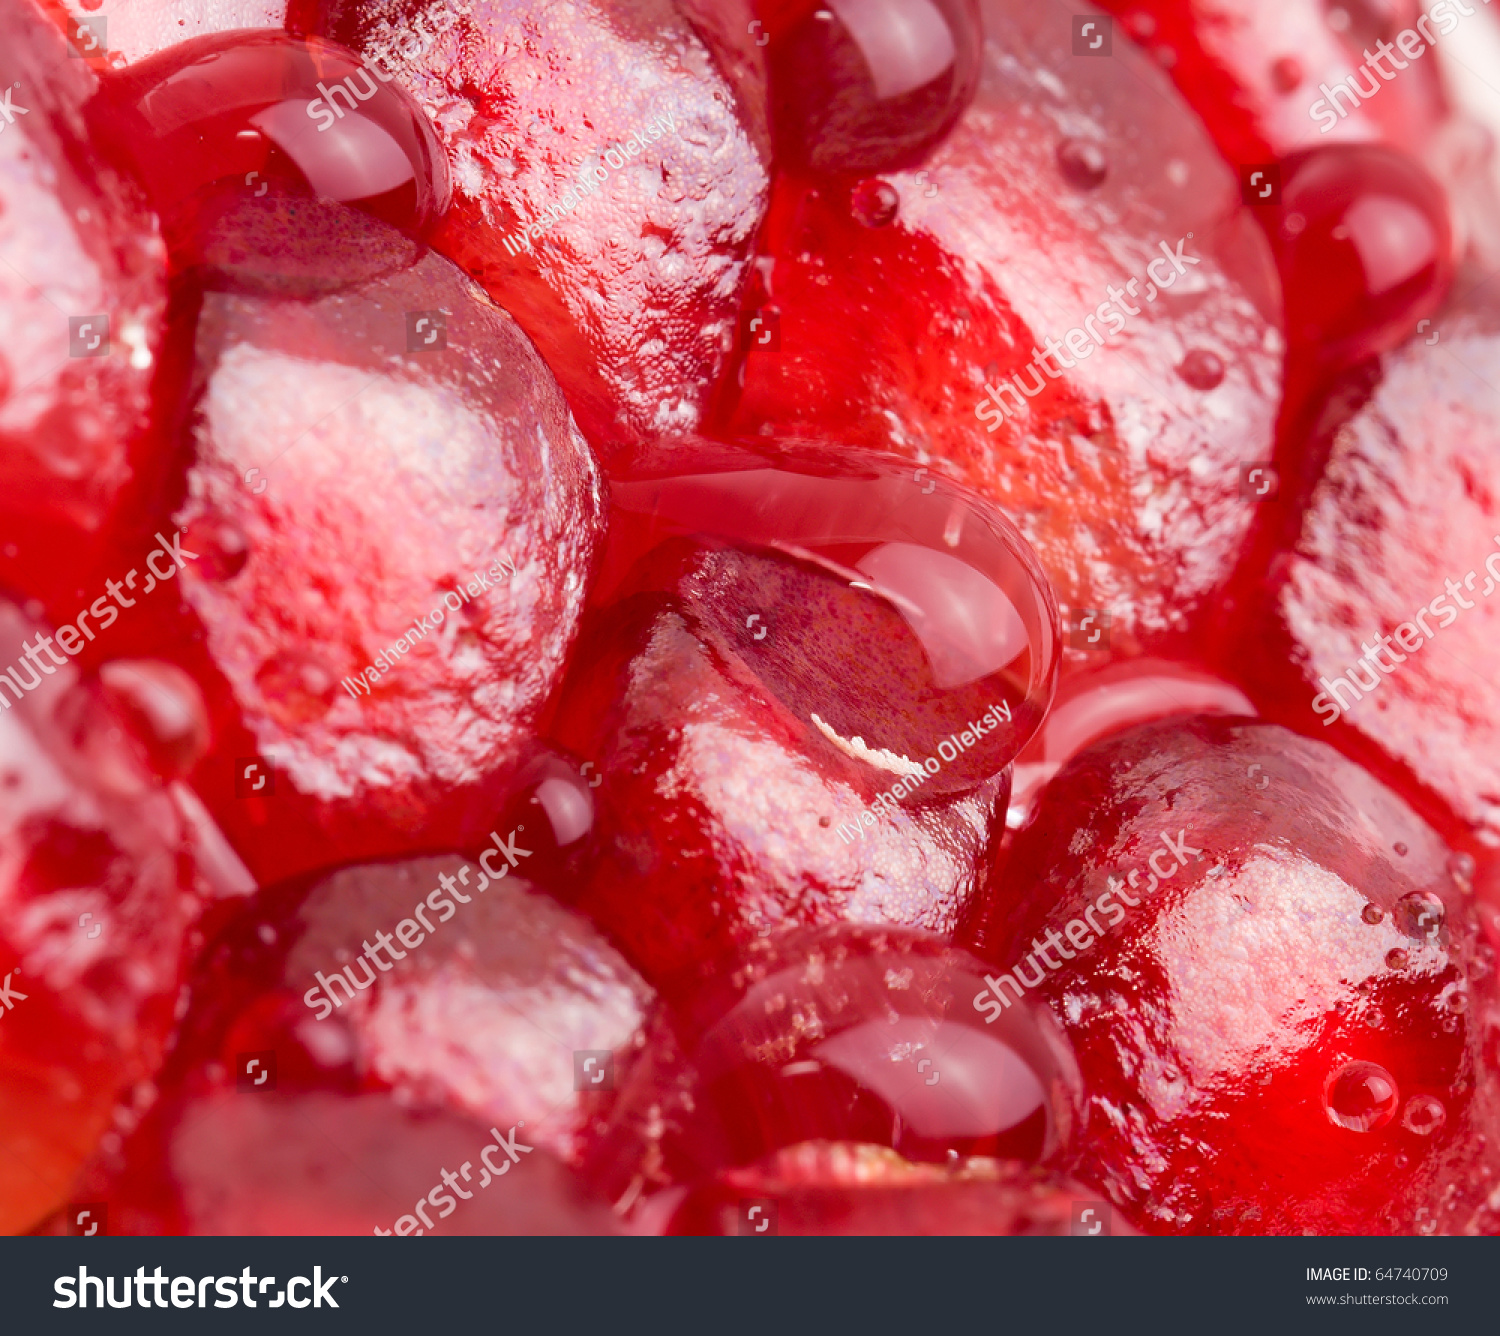 Red Pomegranate Fruit Closeup Detail Background Stock Photo 64740709 ...